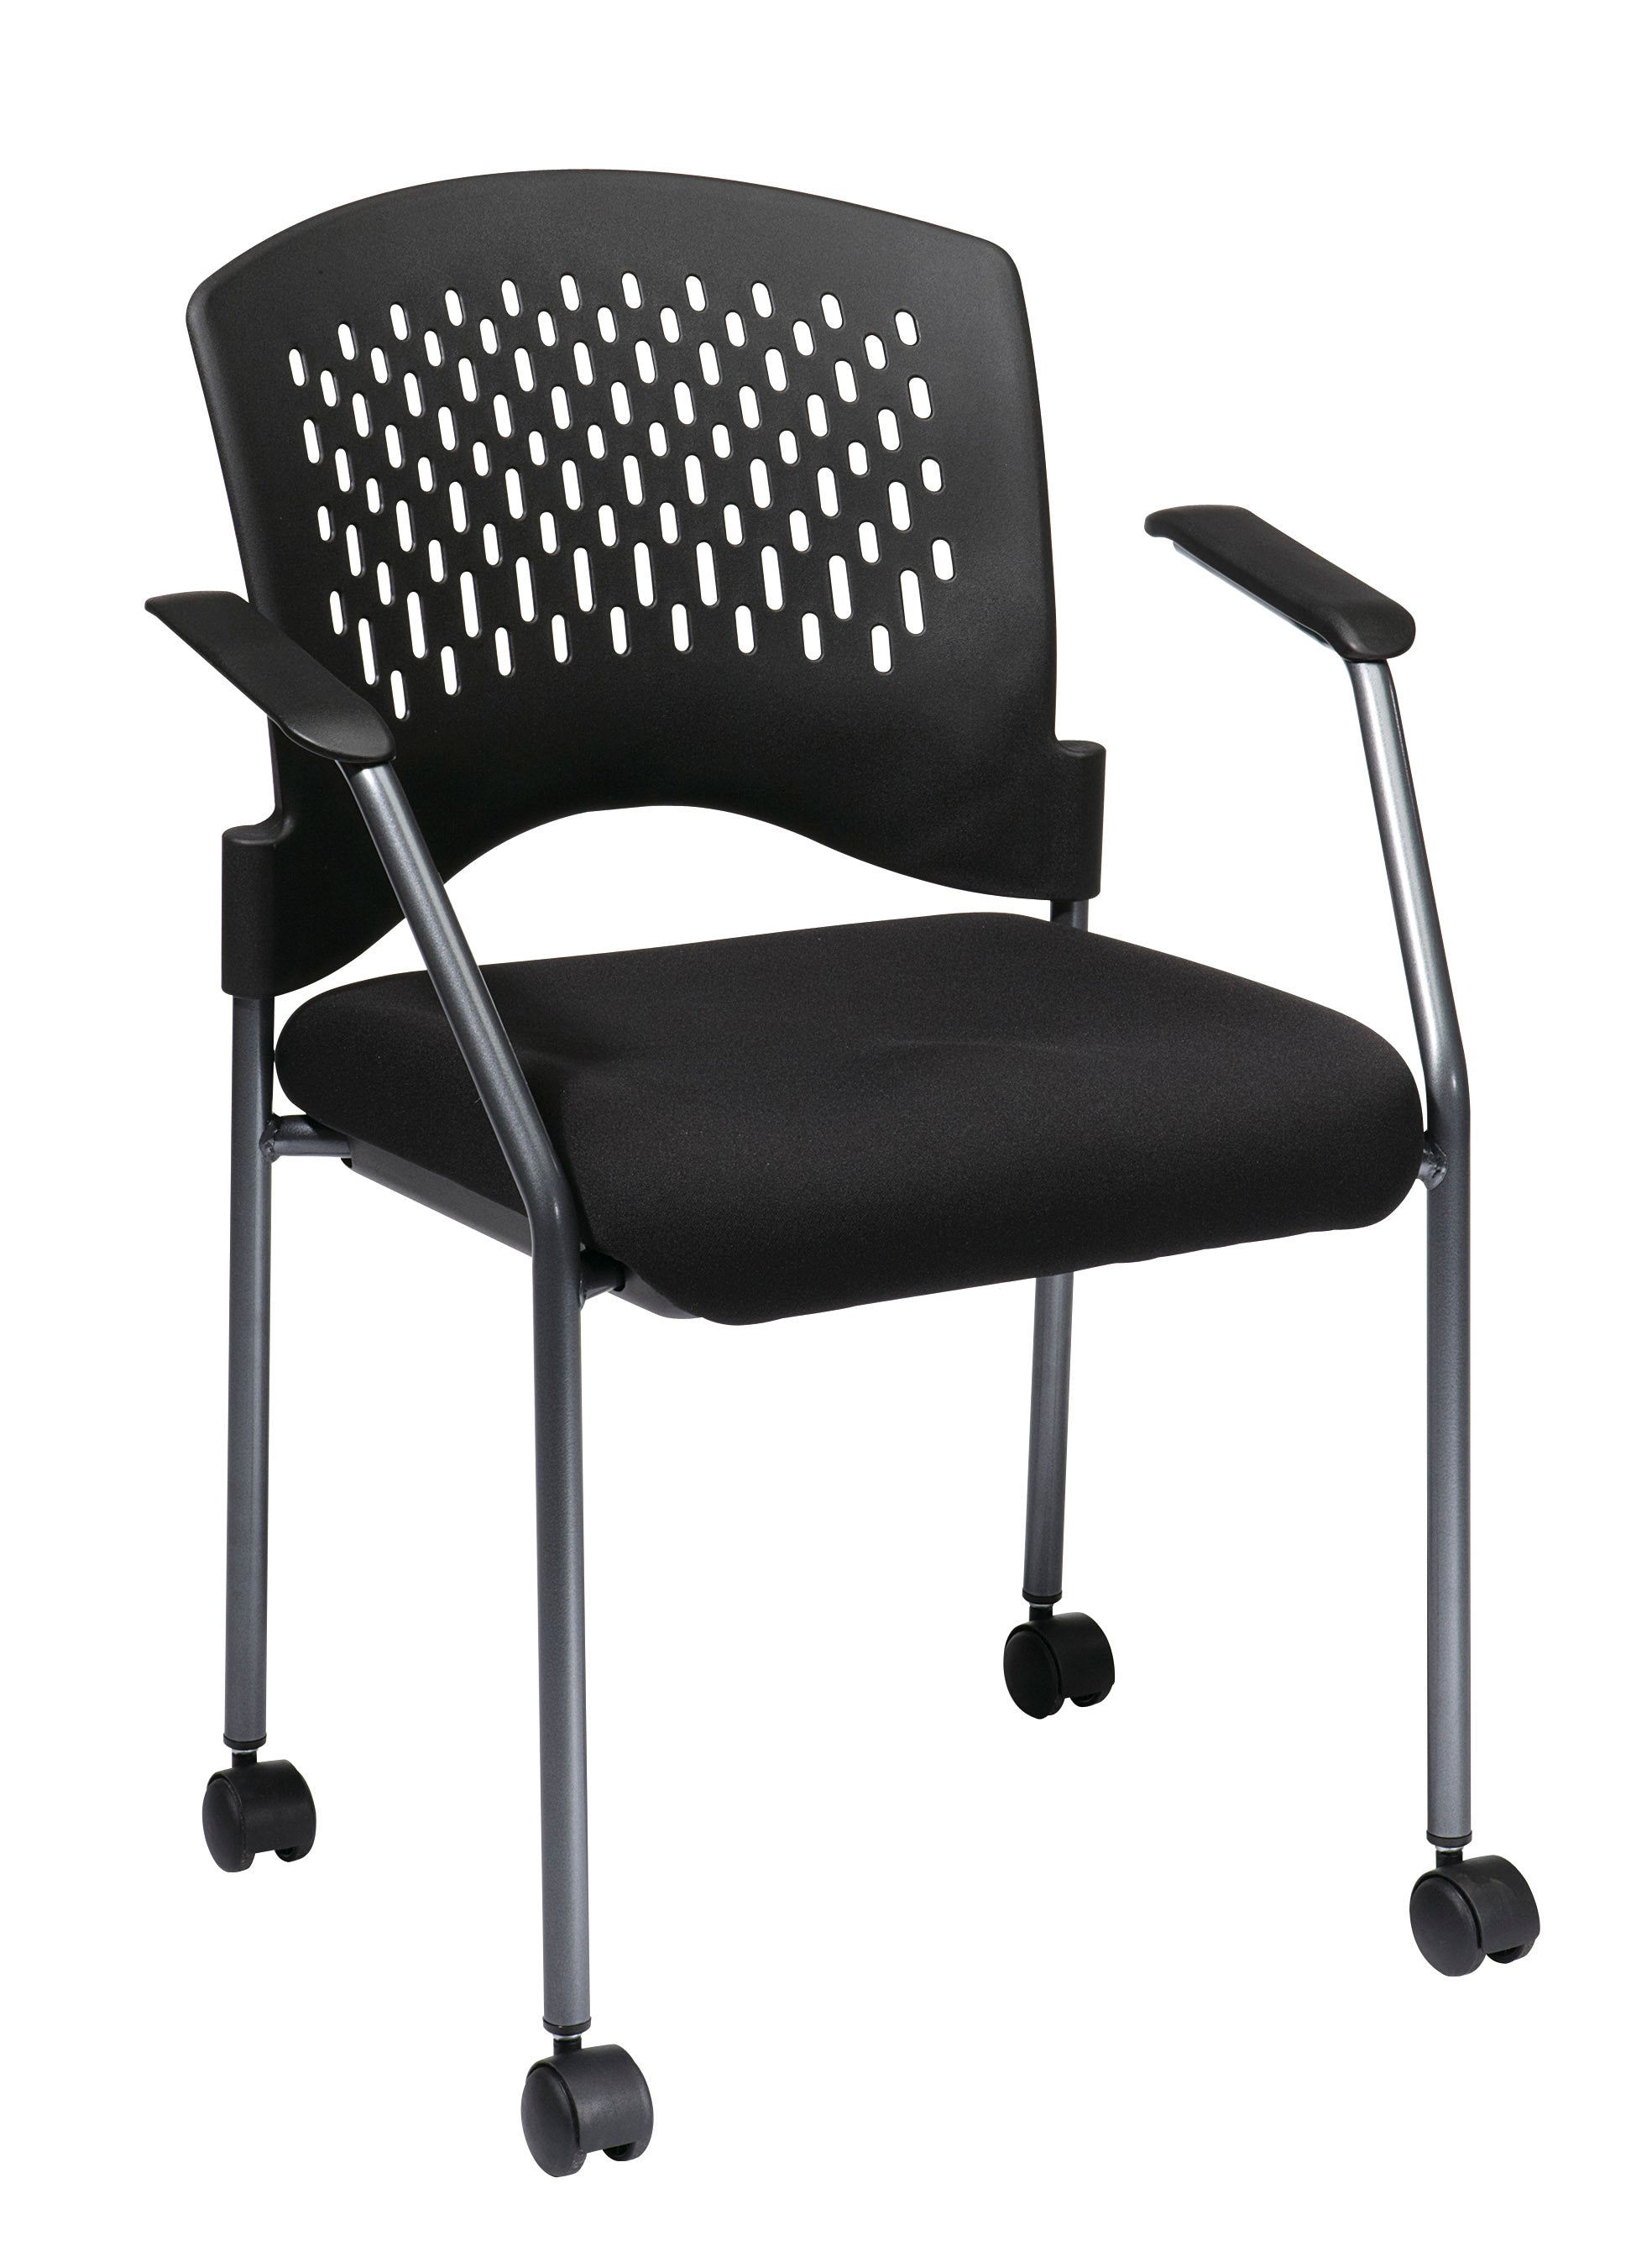 8640 - Titanium Finish Rolling Visitors Arm Chair with Casters by Office Star